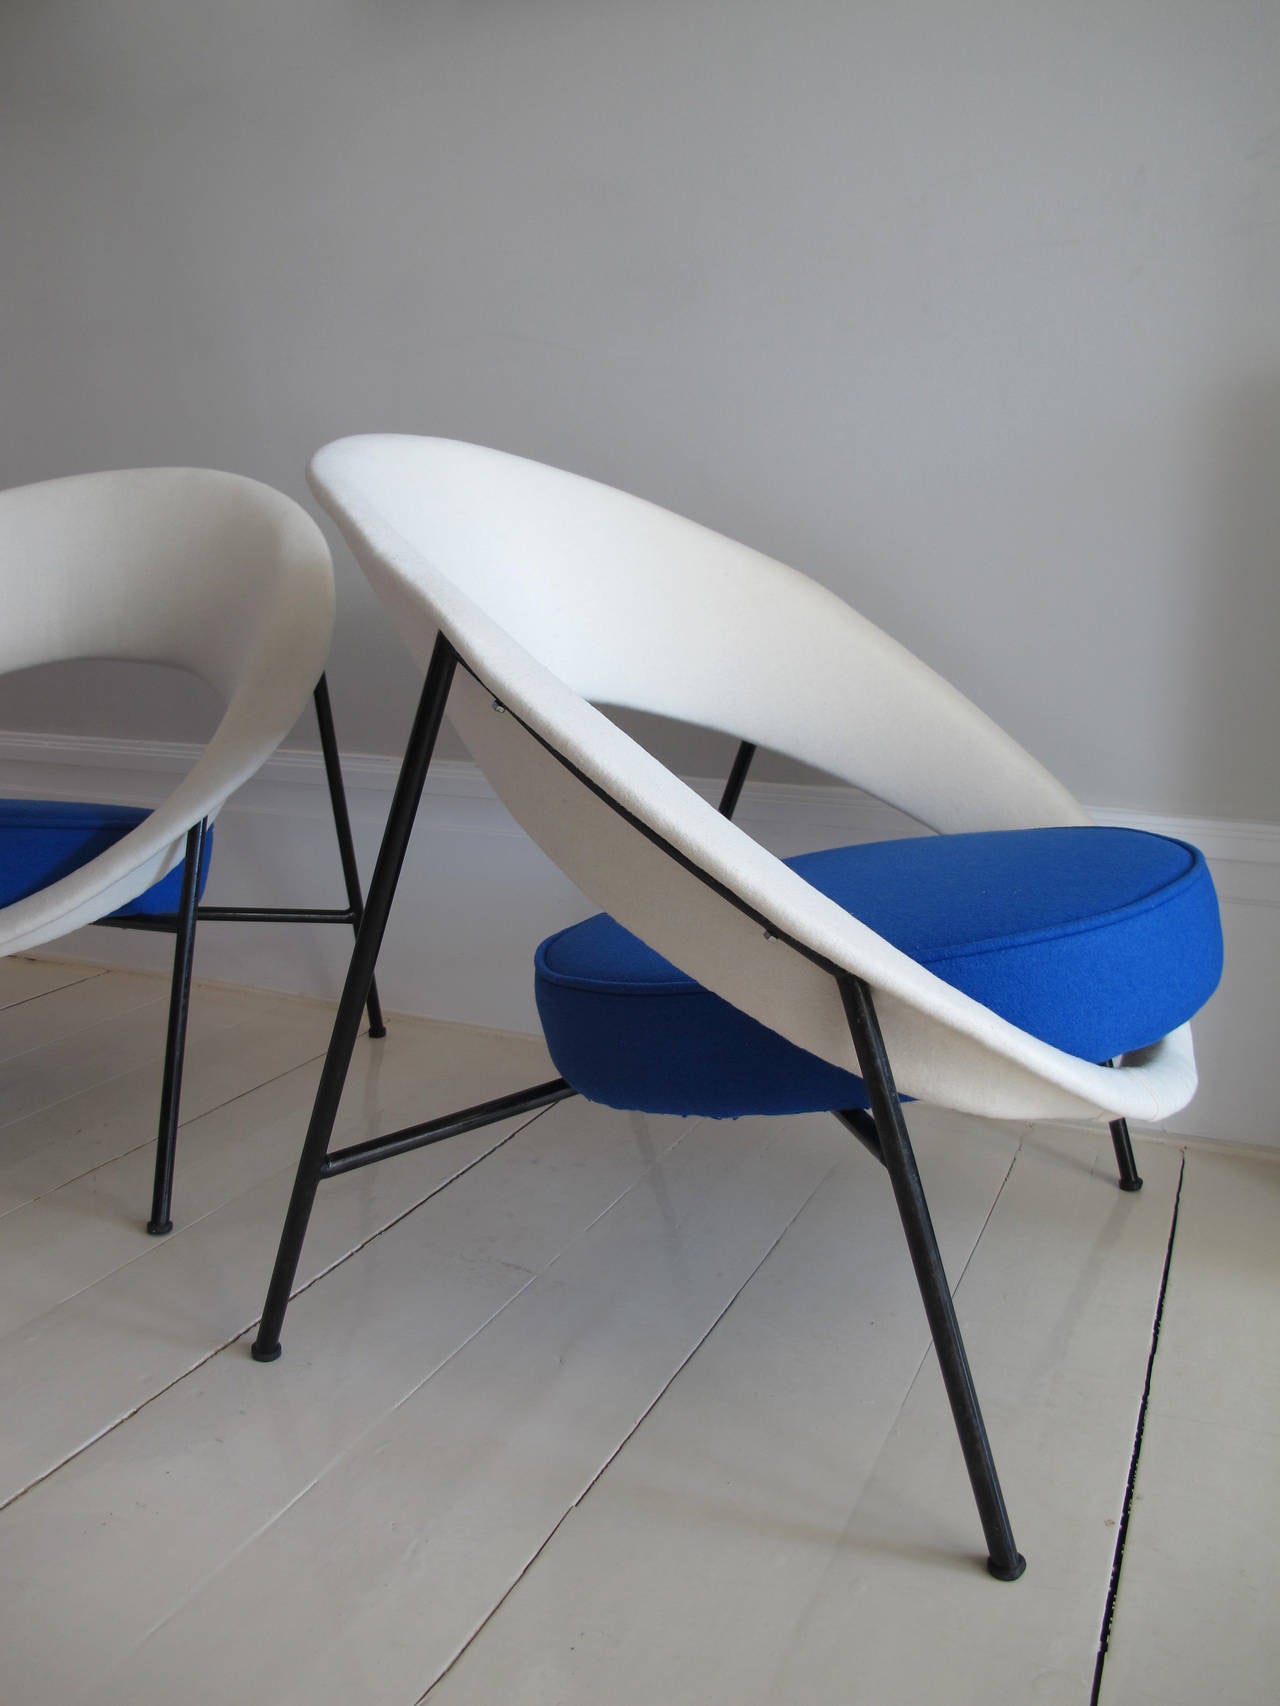 Pair of Saturn chairs.
Designed by Genevieve Dangles & Christian Defrance. Reupholstered in felt
circa 1955.
France.